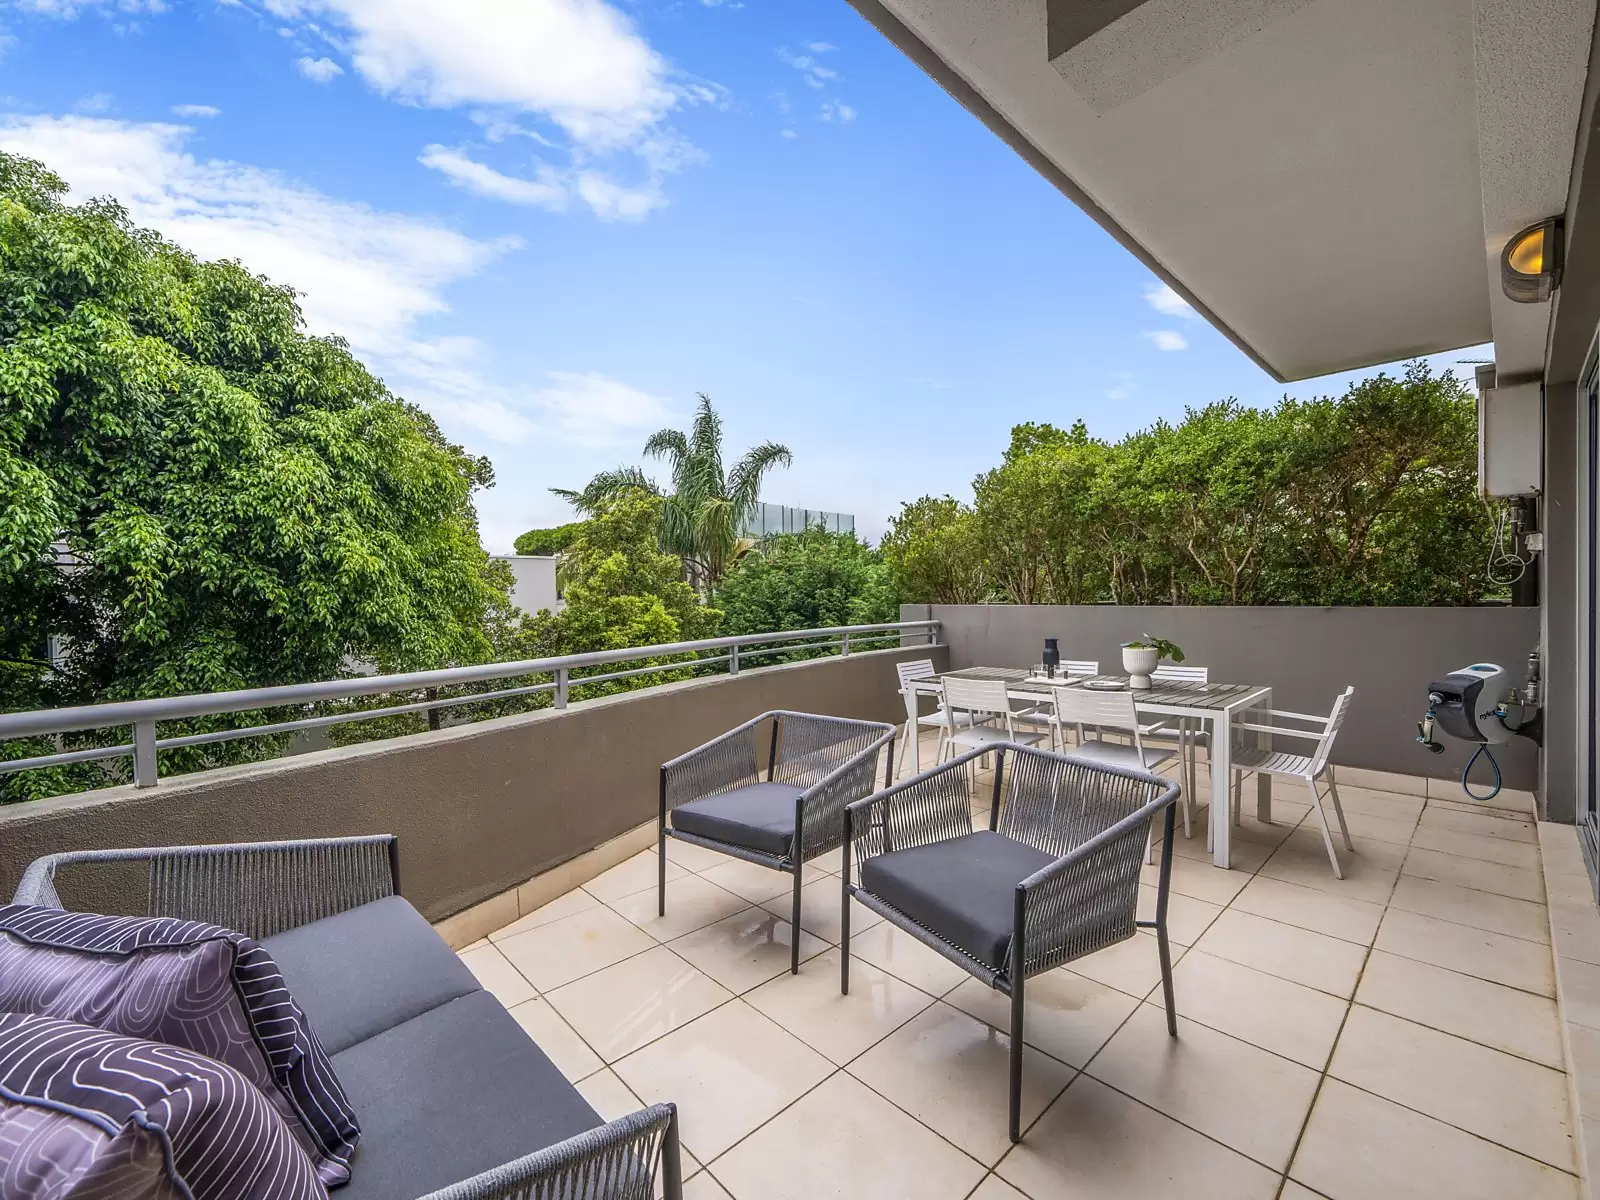 Photo #8: 7/30-32 Birriga Road, Bellevue Hill - Auction by Sydney Sotheby's International Realty